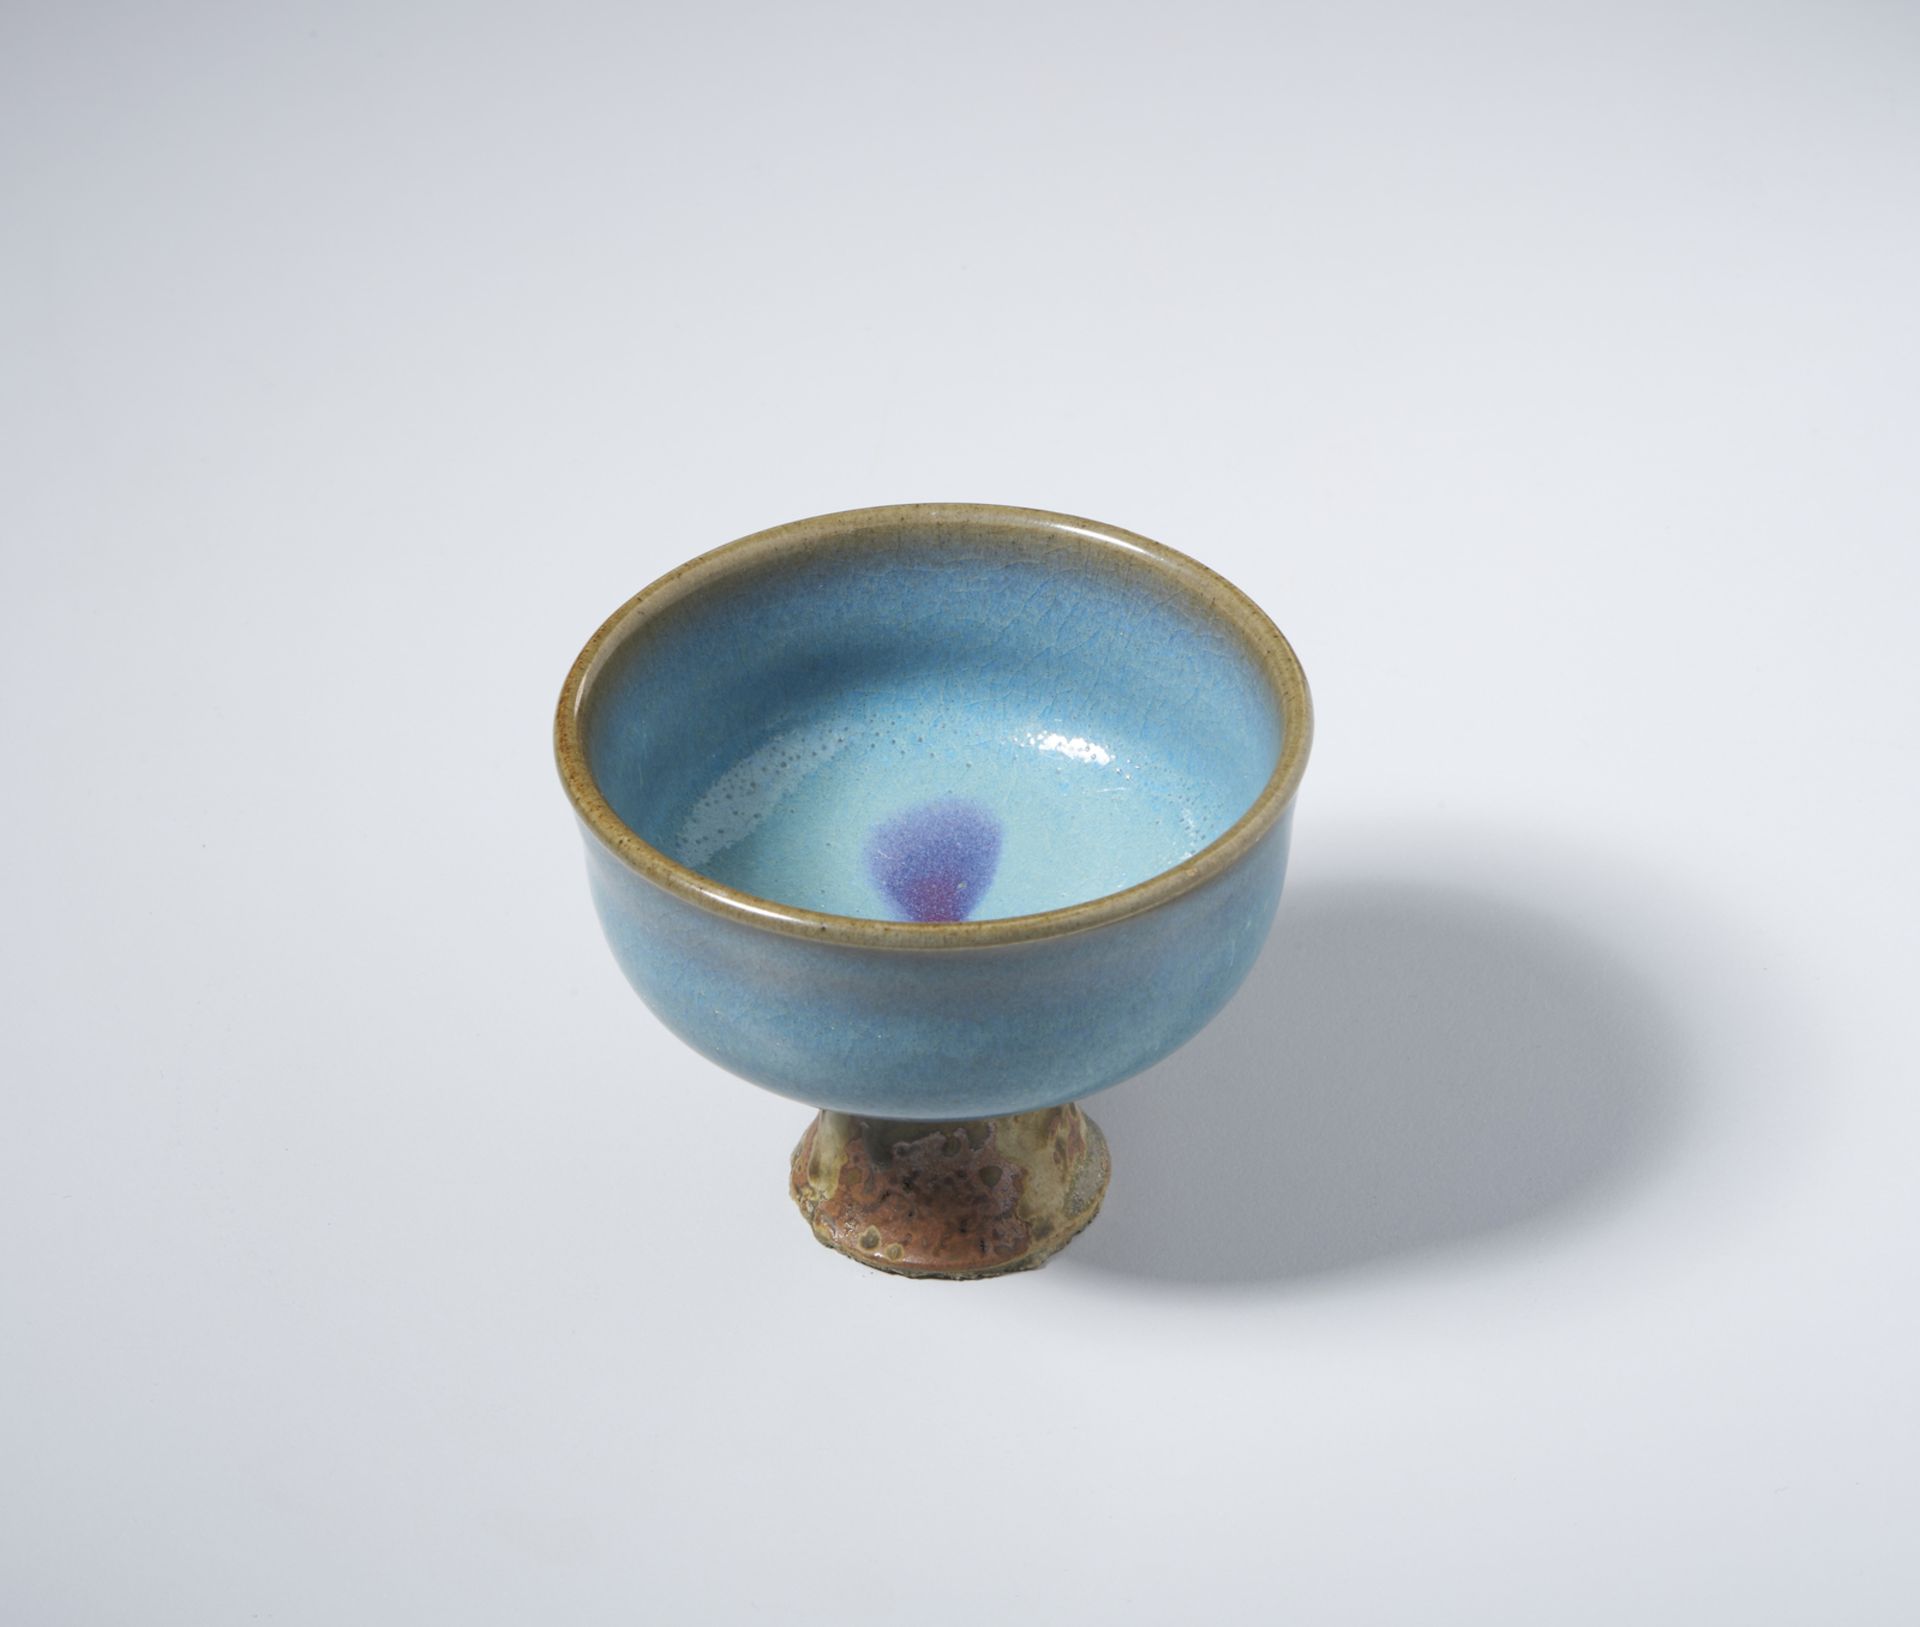 A Jun ware stem cup with purple spot China, Qing, 19th centuryCm 9,50 x 7,50 - Image 2 of 3